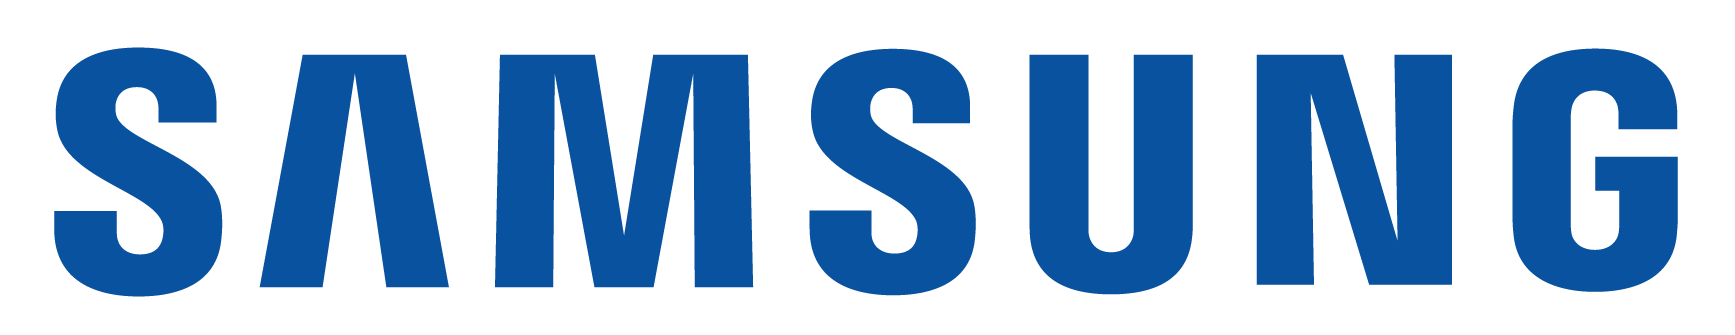 New Samsung 2017 Logo - What's New for Samsung in 2017?